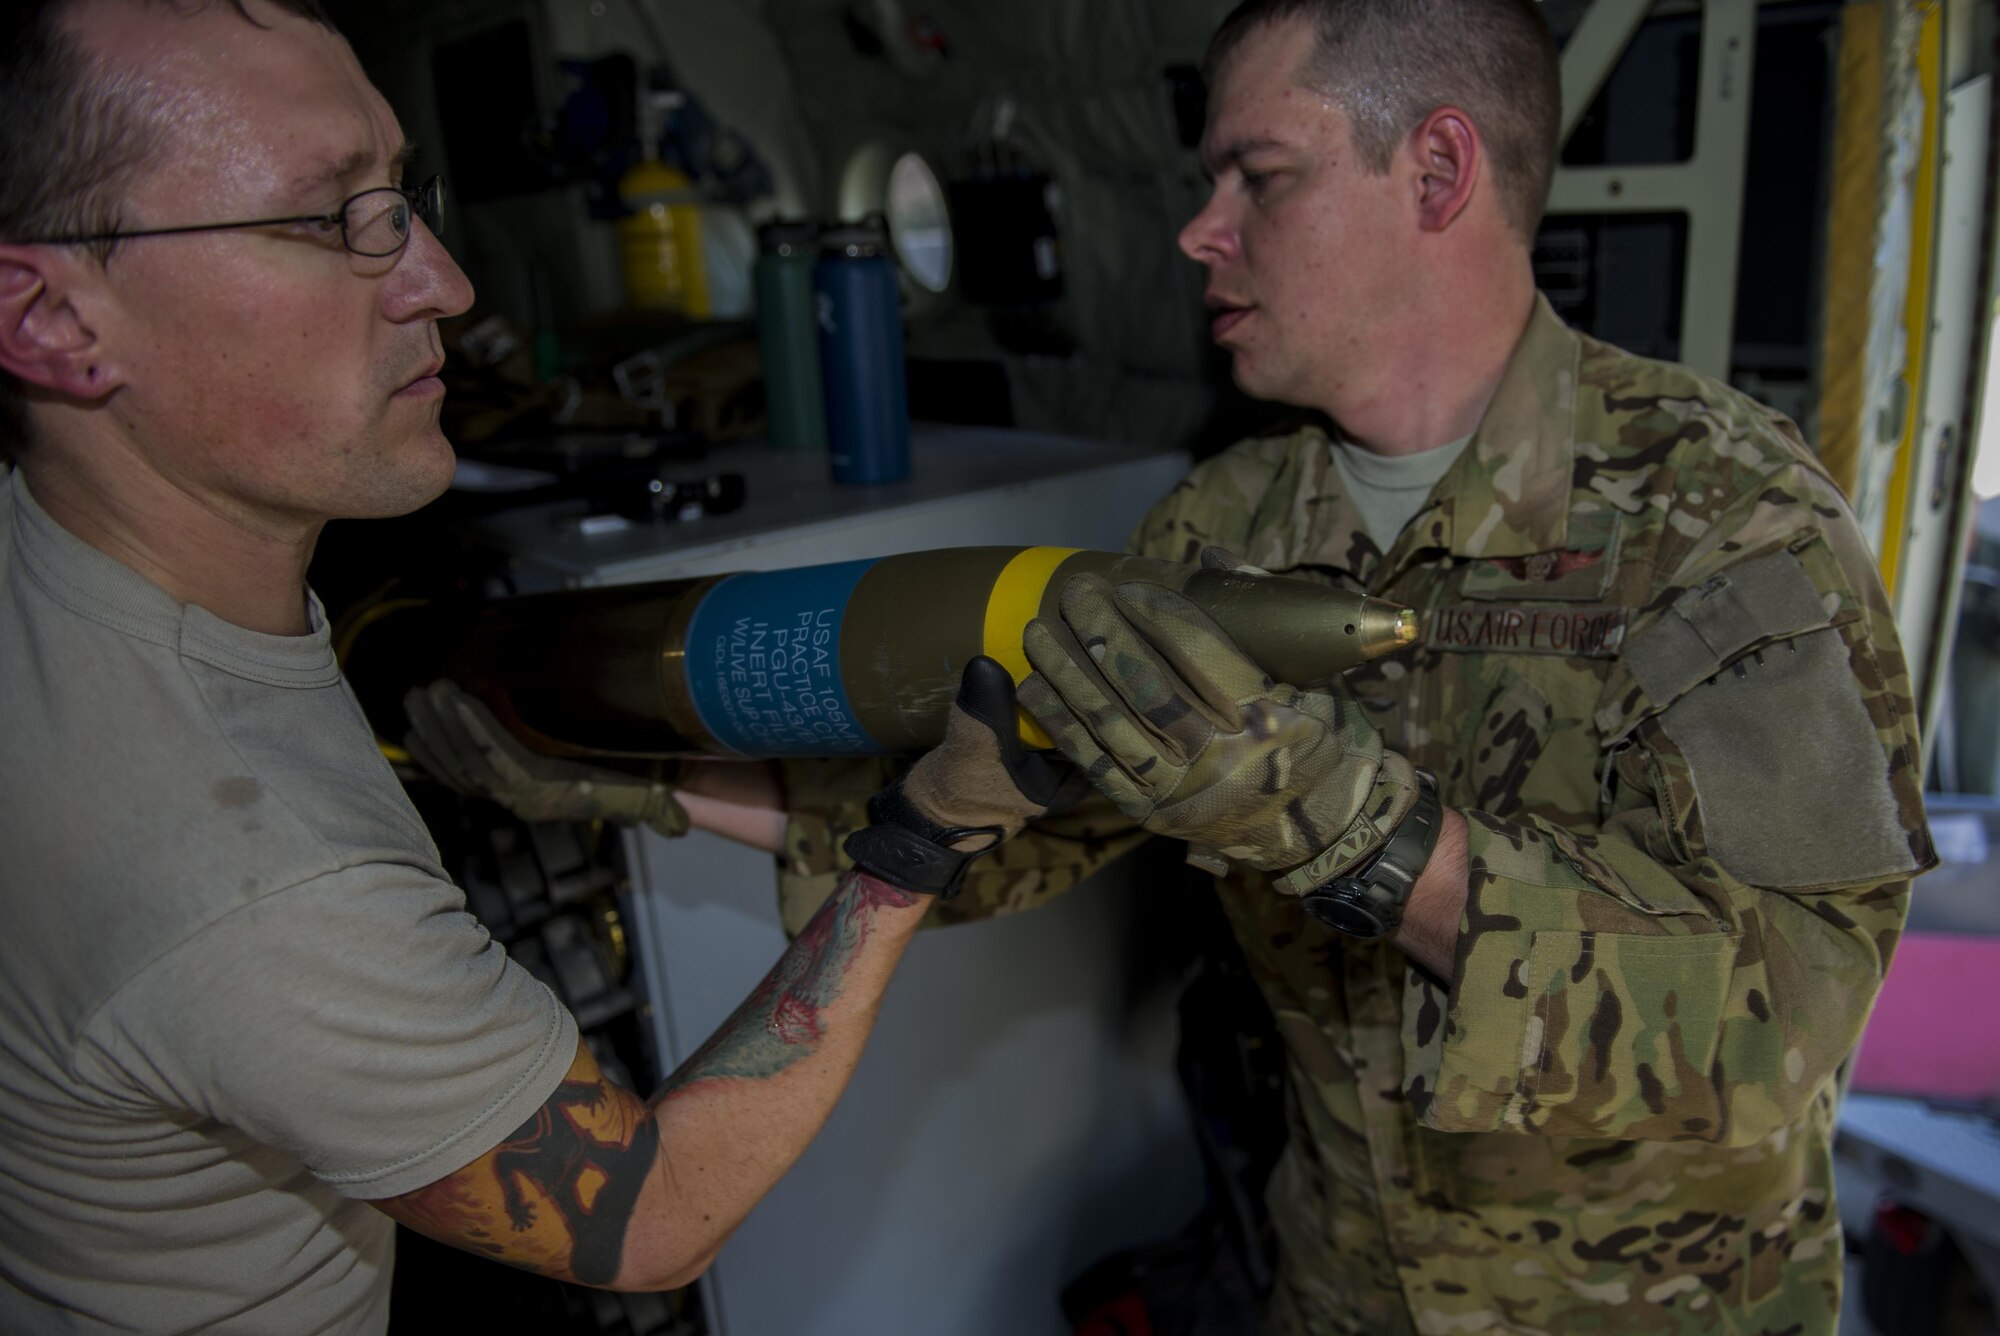 Tech. Sgt. Johnny Hooker, an aerial gunner with the 1st Special Operations Group Detachment 2, hands a 105 mm round to Staff Sgt. Derek Watson, an aerial gunner with 1 SOG Det. 2, for inspection during a weapons load at Hurlburt Field, Fla., Sept. 6, 2016. Each handler inspects the overall condition of the round before it is loaded. (U.S. Air Force photo by Airman 1st Class Isaac O. Guest IV)